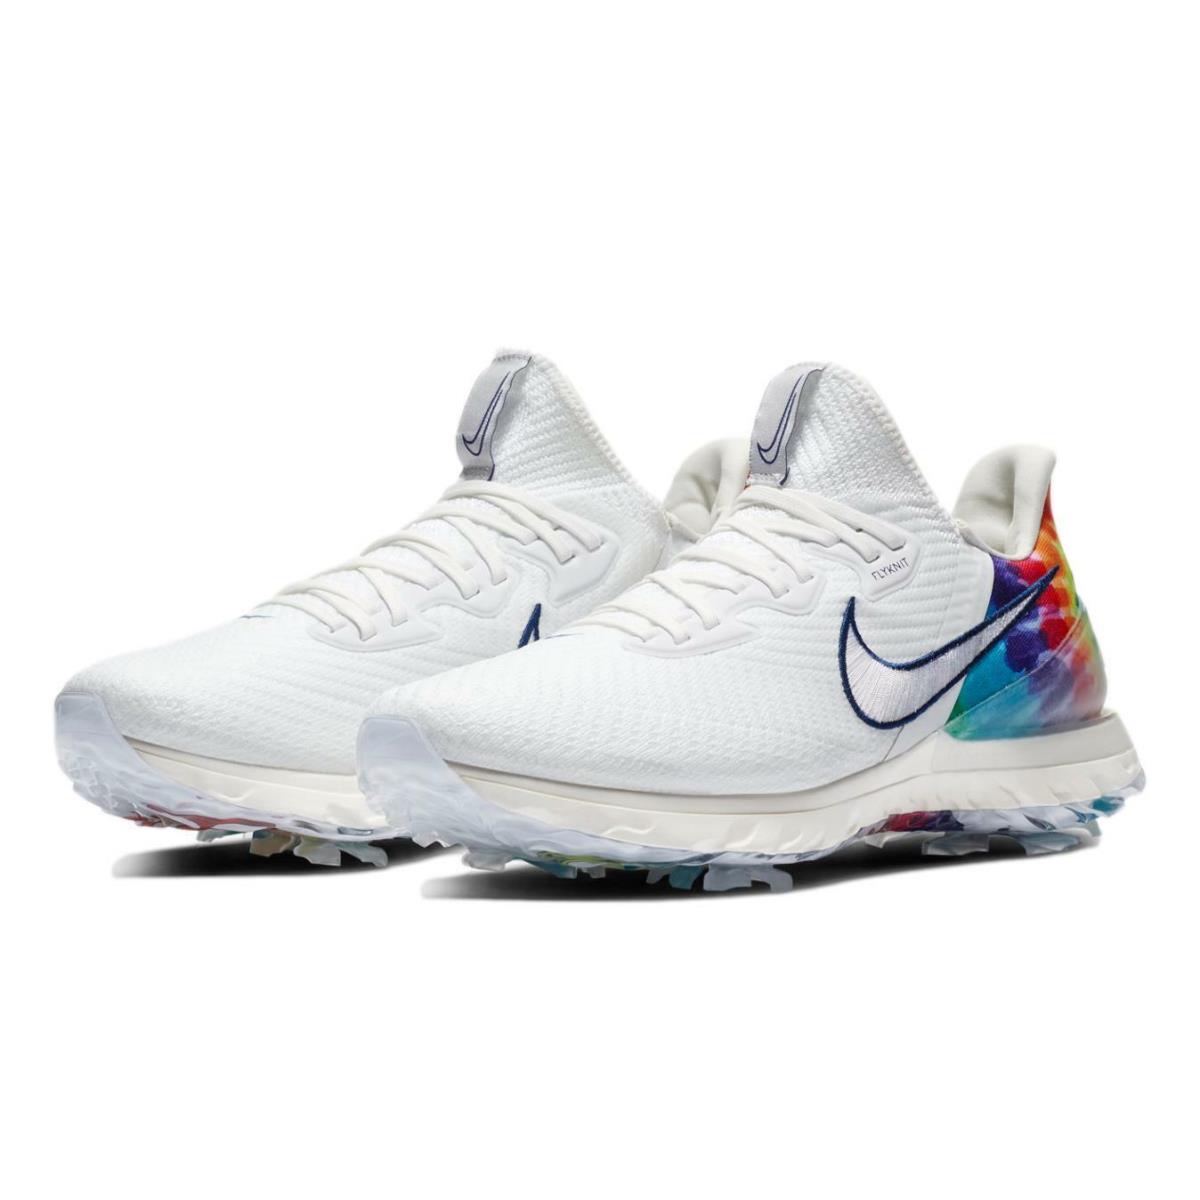 Nike Air Zoom Infinity Tour Nrg P `peace Love` Tie Dye Golf Shoes CT3732-100